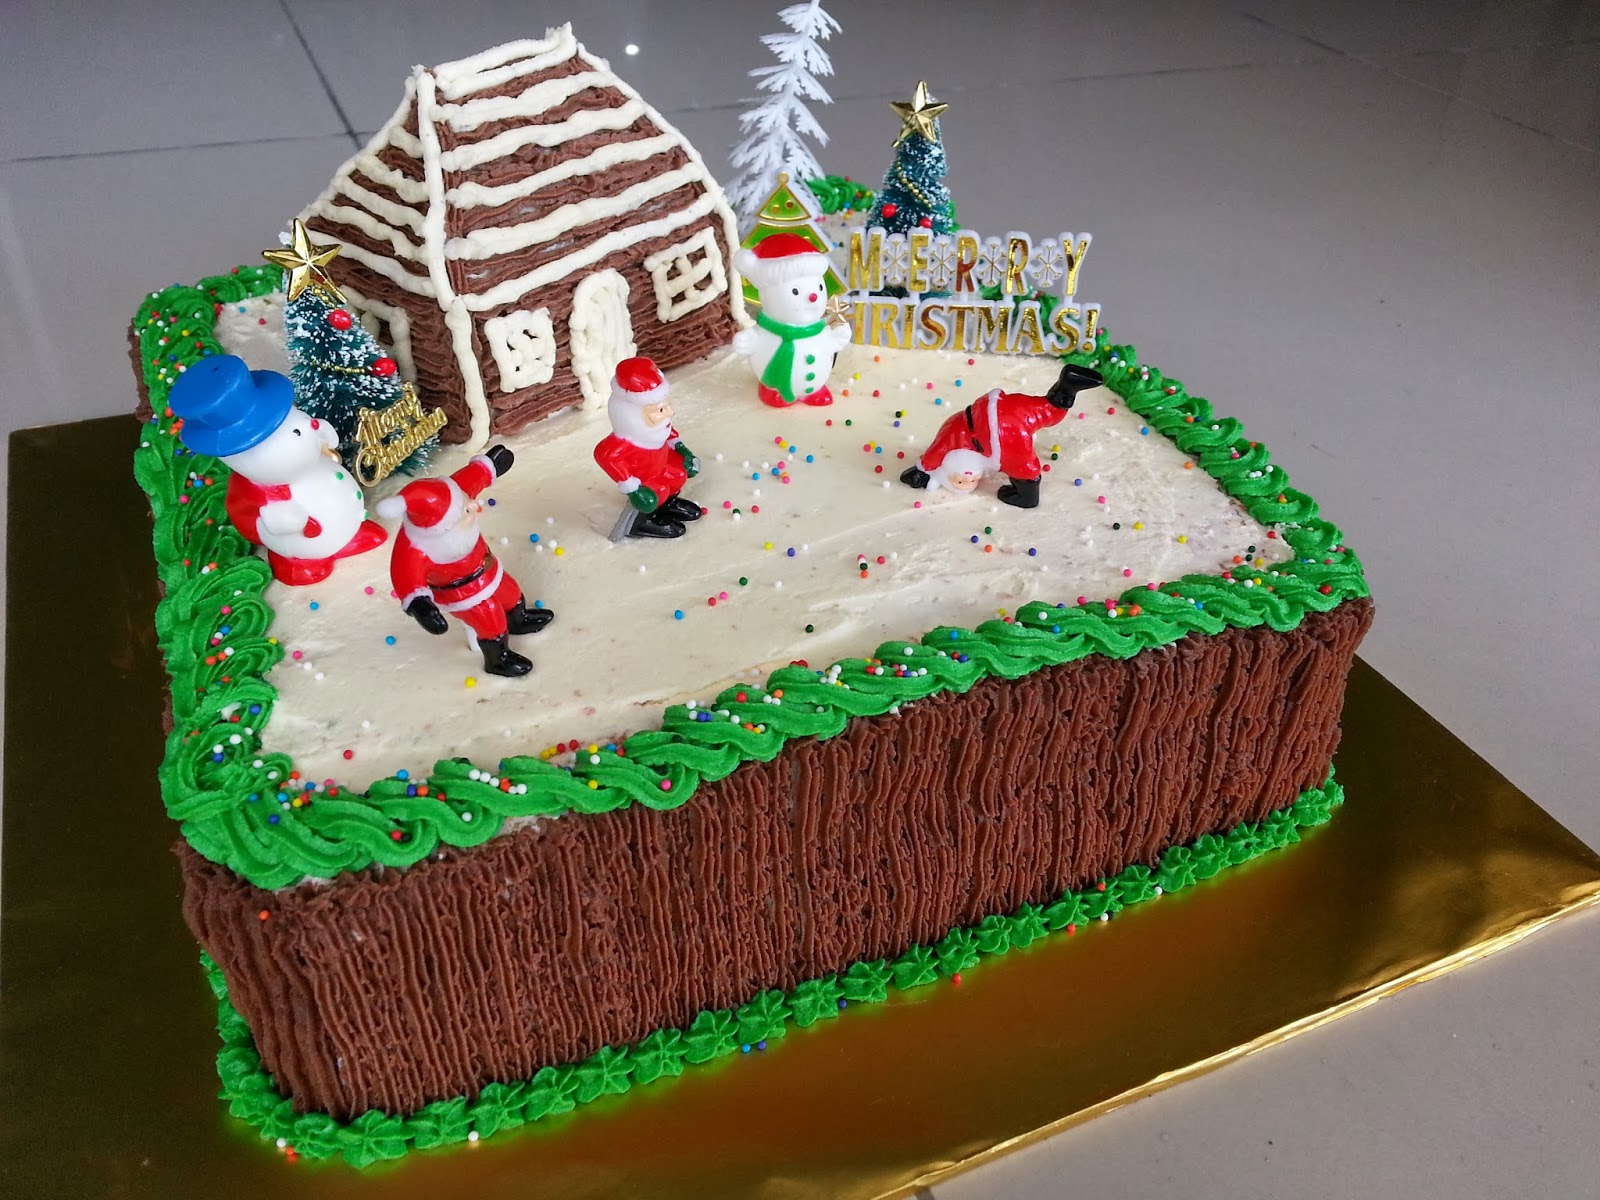 Cakes By Mercy Showstopper of the day, Christmas House Cake